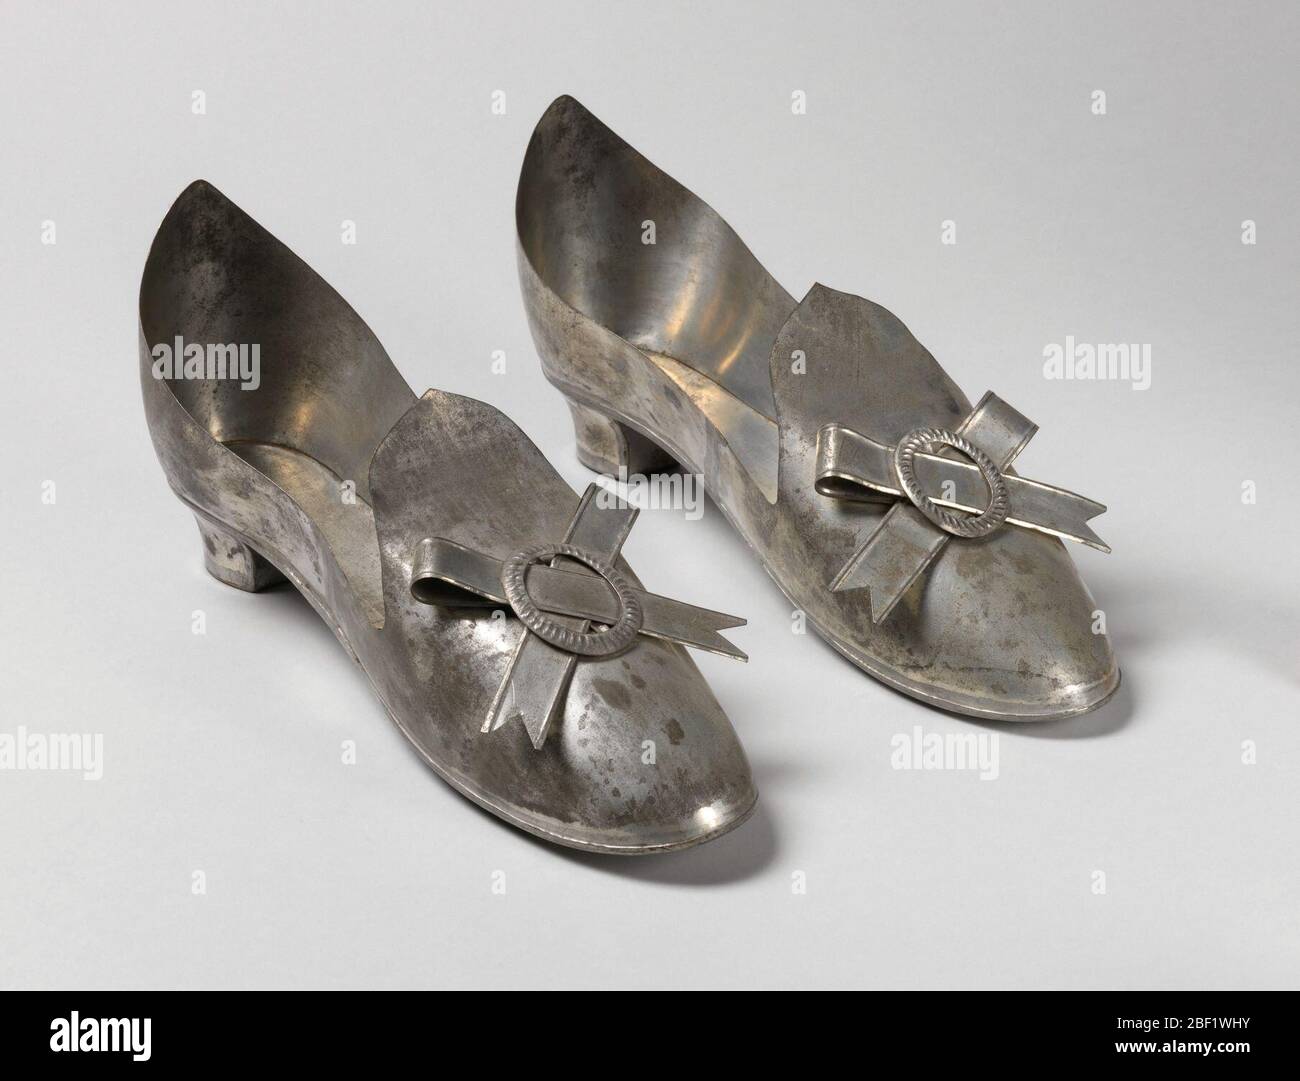 Pair of slippers. Pair of tin slippers on short heels; looped tin ribbons with nothced ends and stamped oval tin buckles mounted at tongues. Each heel, instep, back and sole made separately, soldered together. Stock Photo